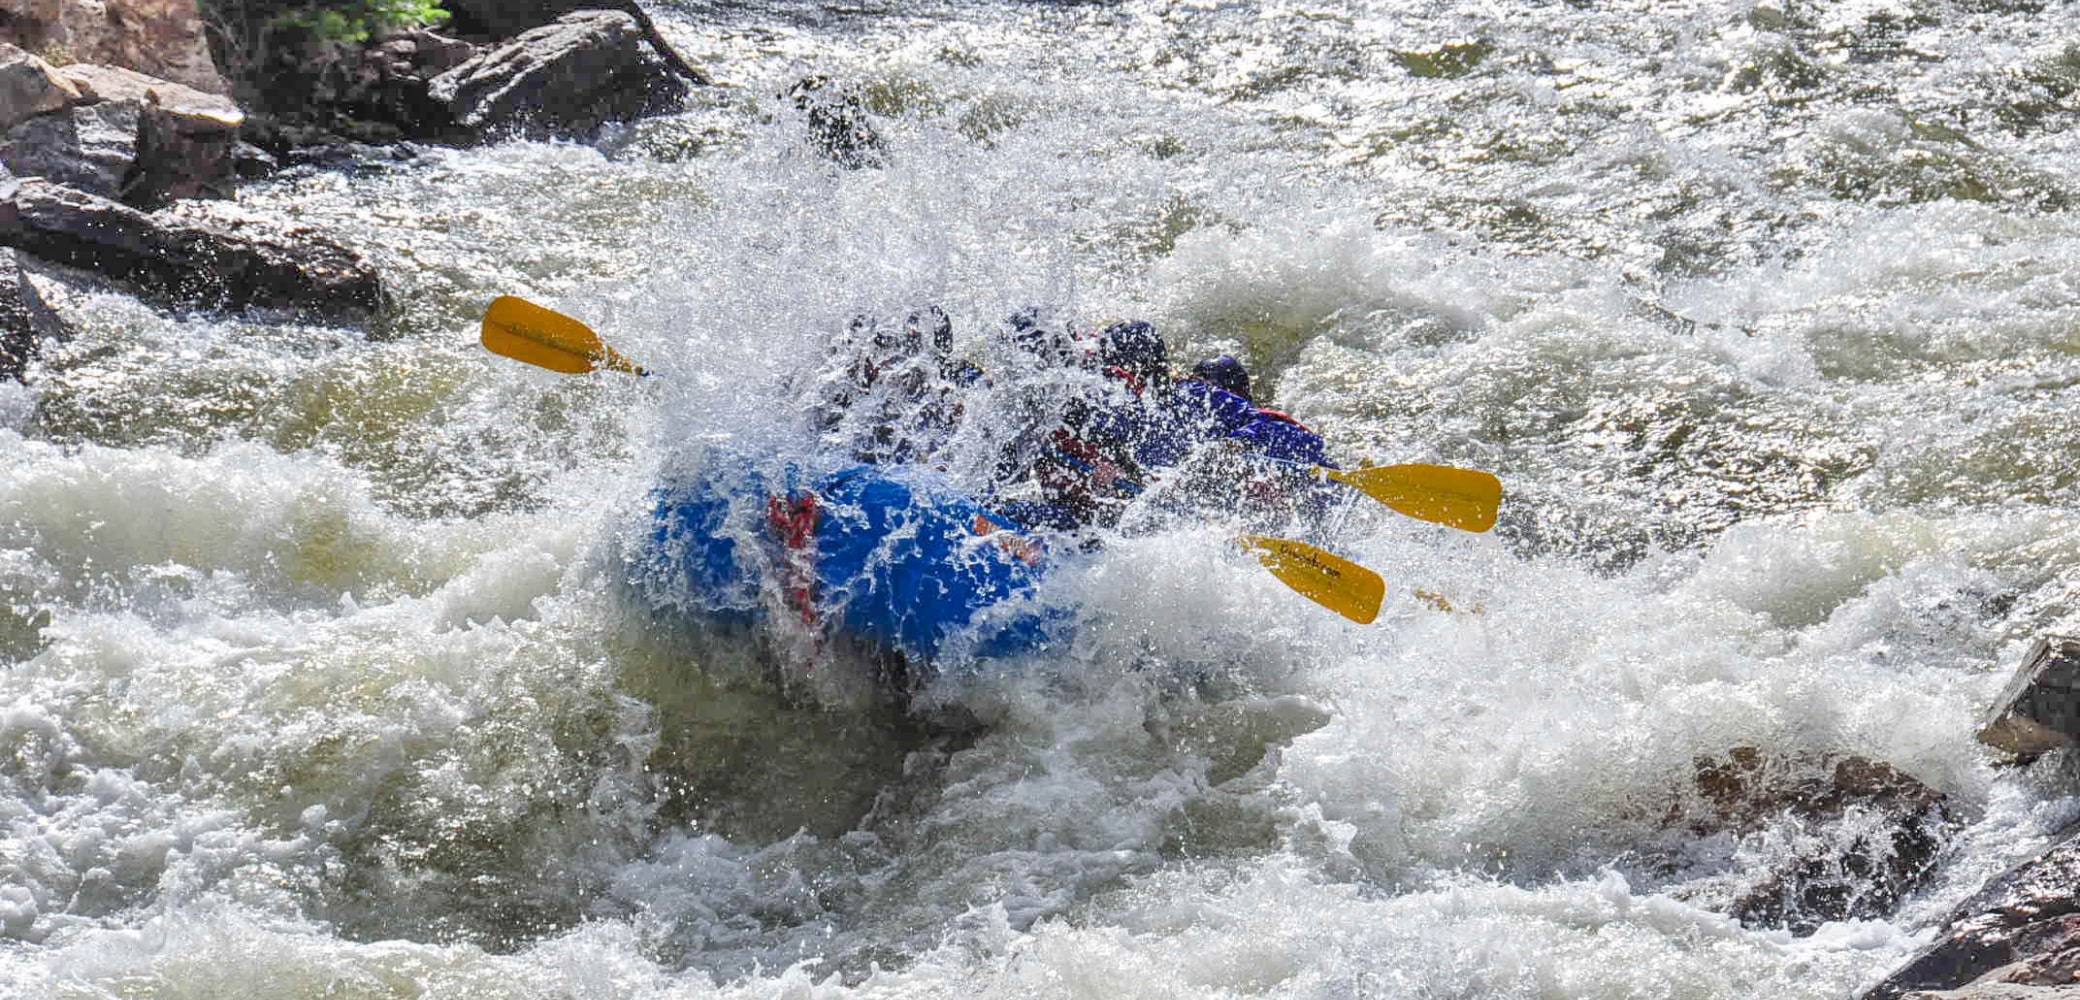 people getting splashed on an Advanced Clear Creek River Rafting trip